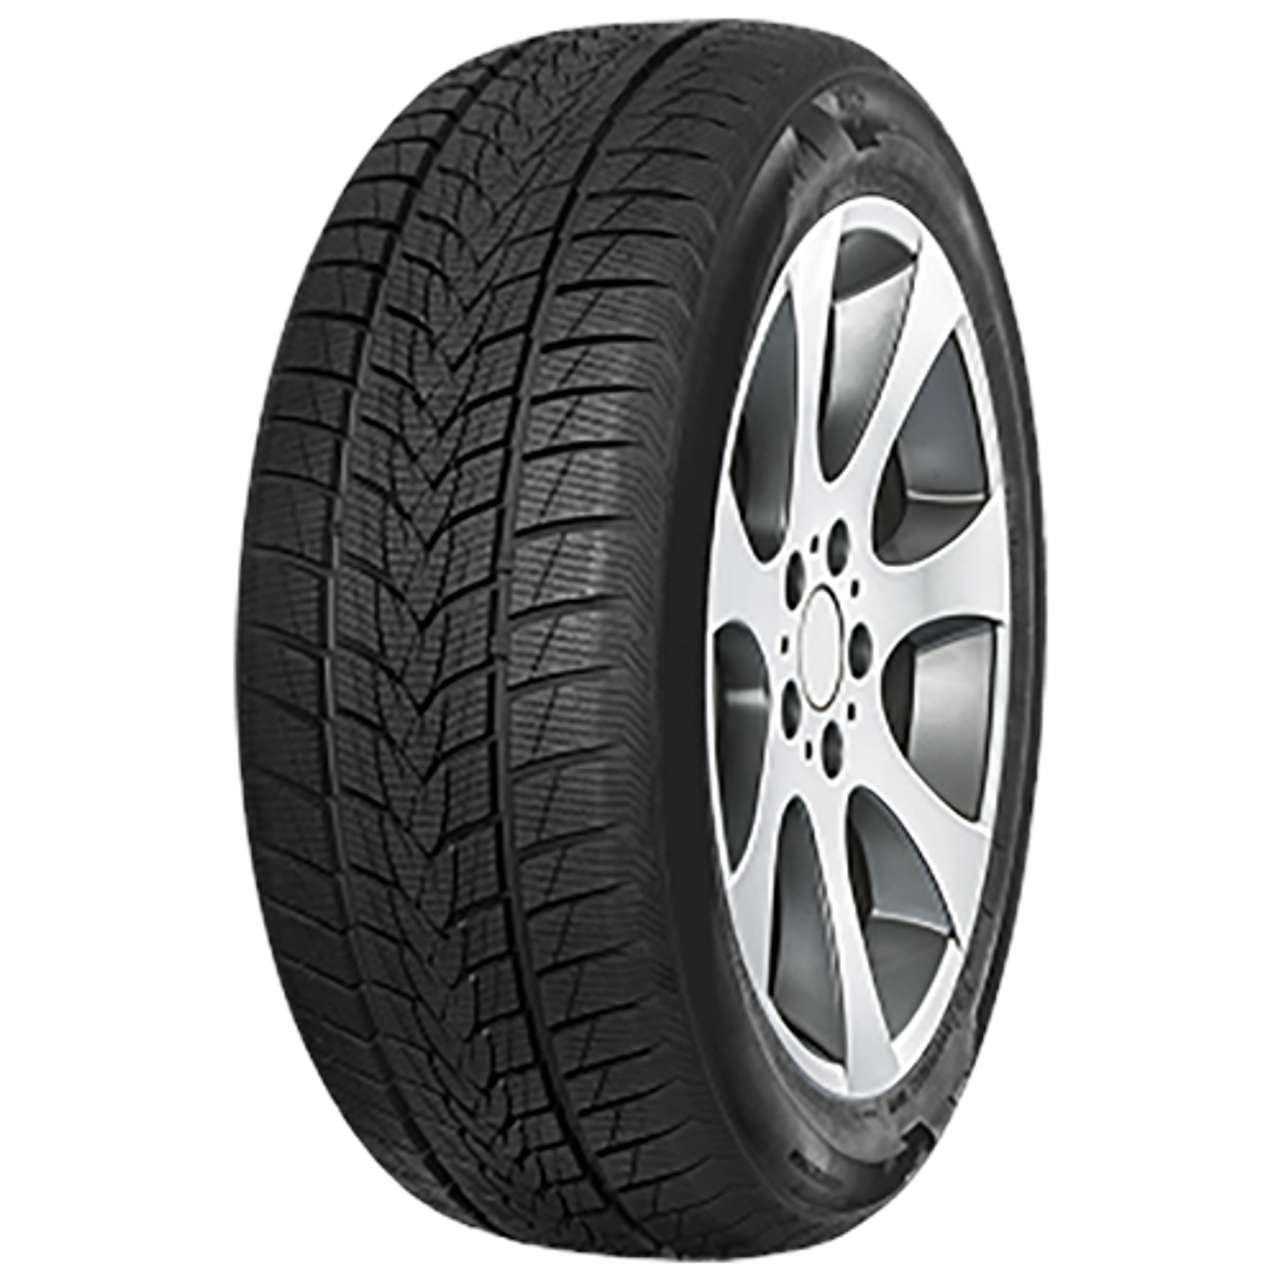 IMPERIAL SNOWDRAGON UHP 205/40R18 86V BSW